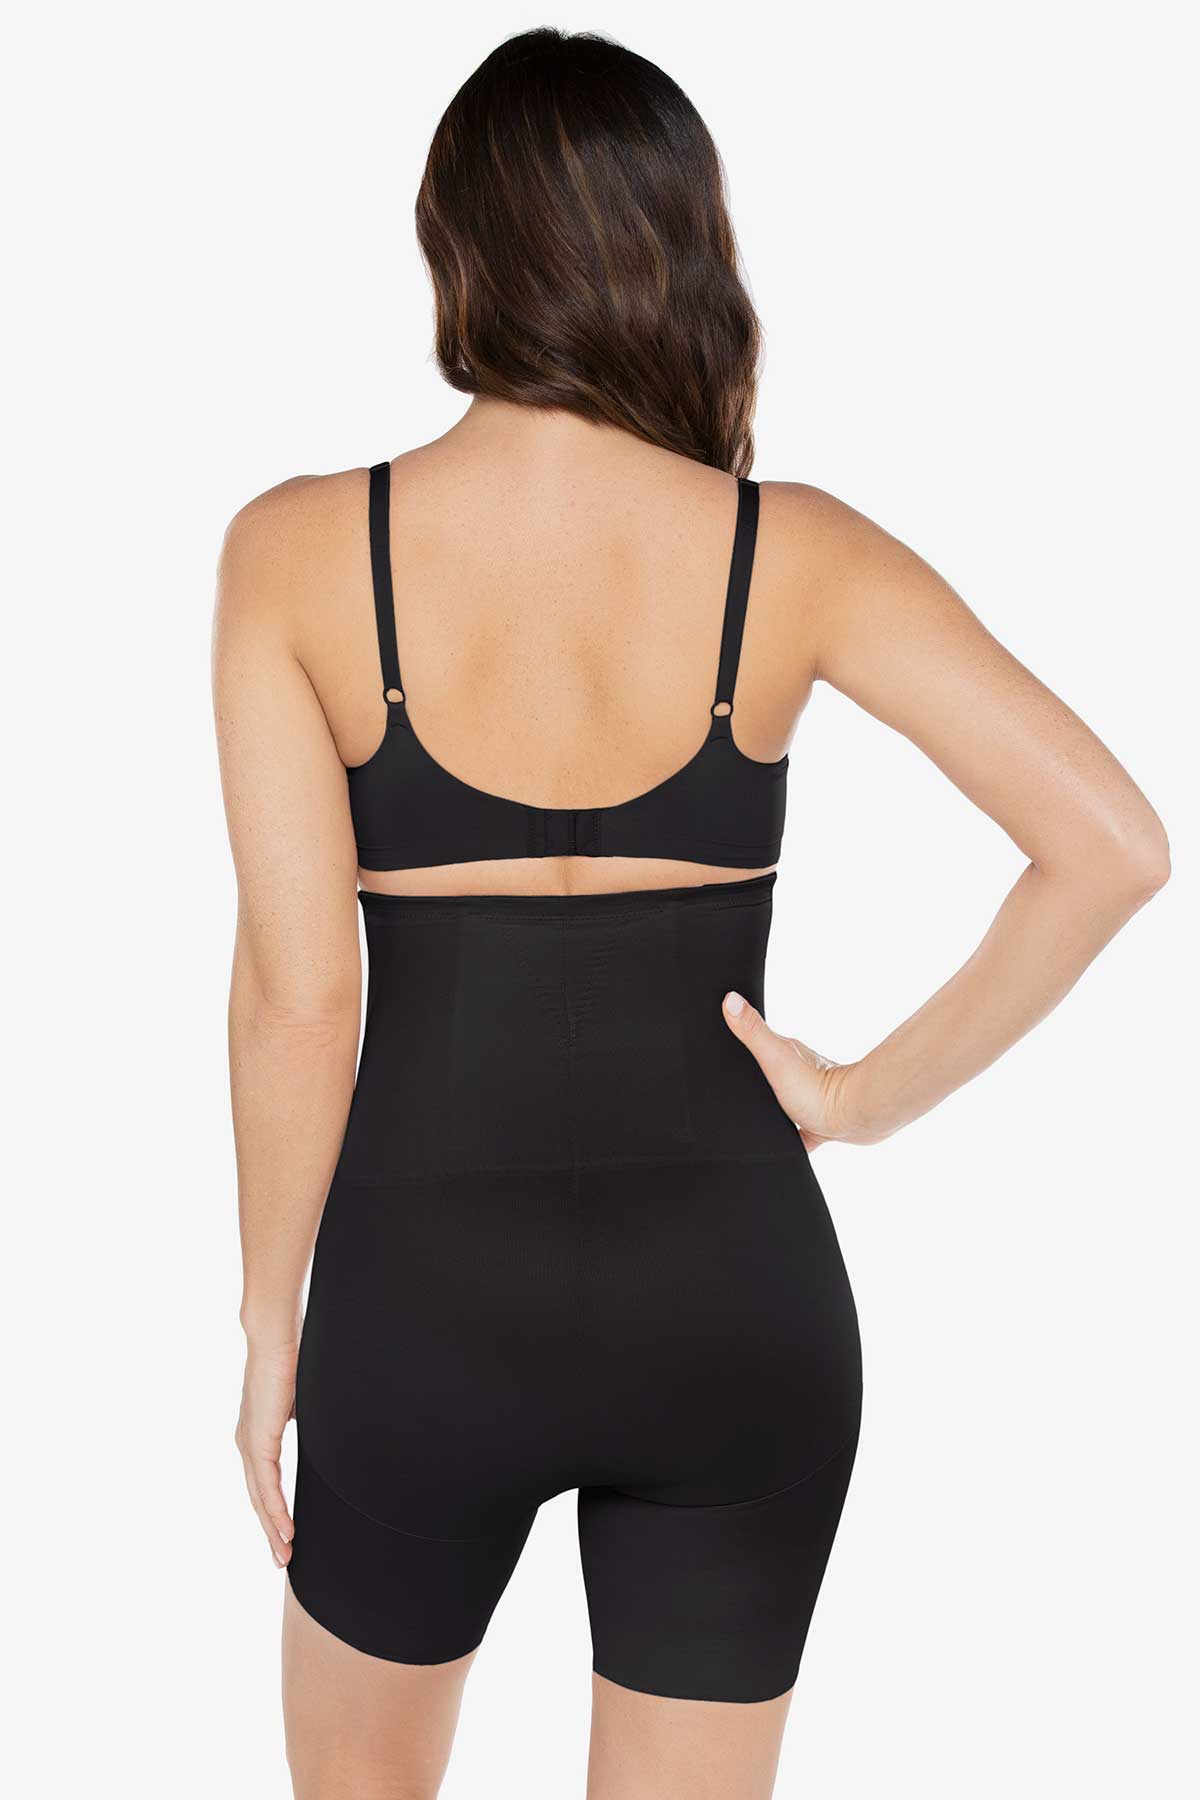 Miraclesuit Shape Away with Back Magic Hi-Waist Thigh Slimmer 2919